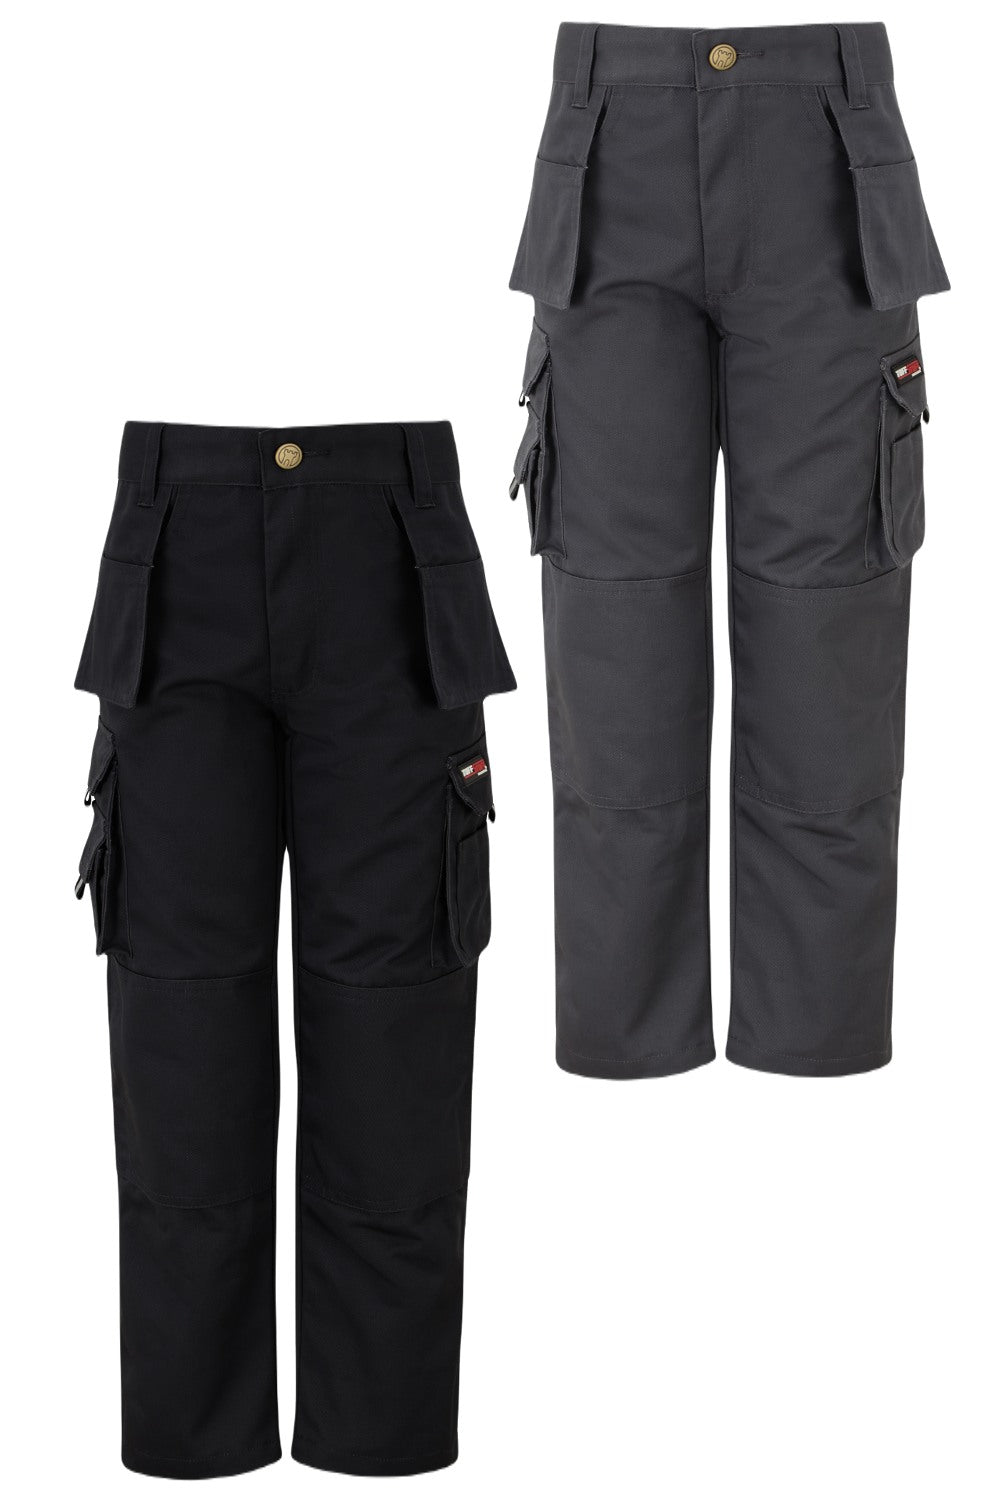 TuffStuff Junior Pro Work Trousers in Grey and Black